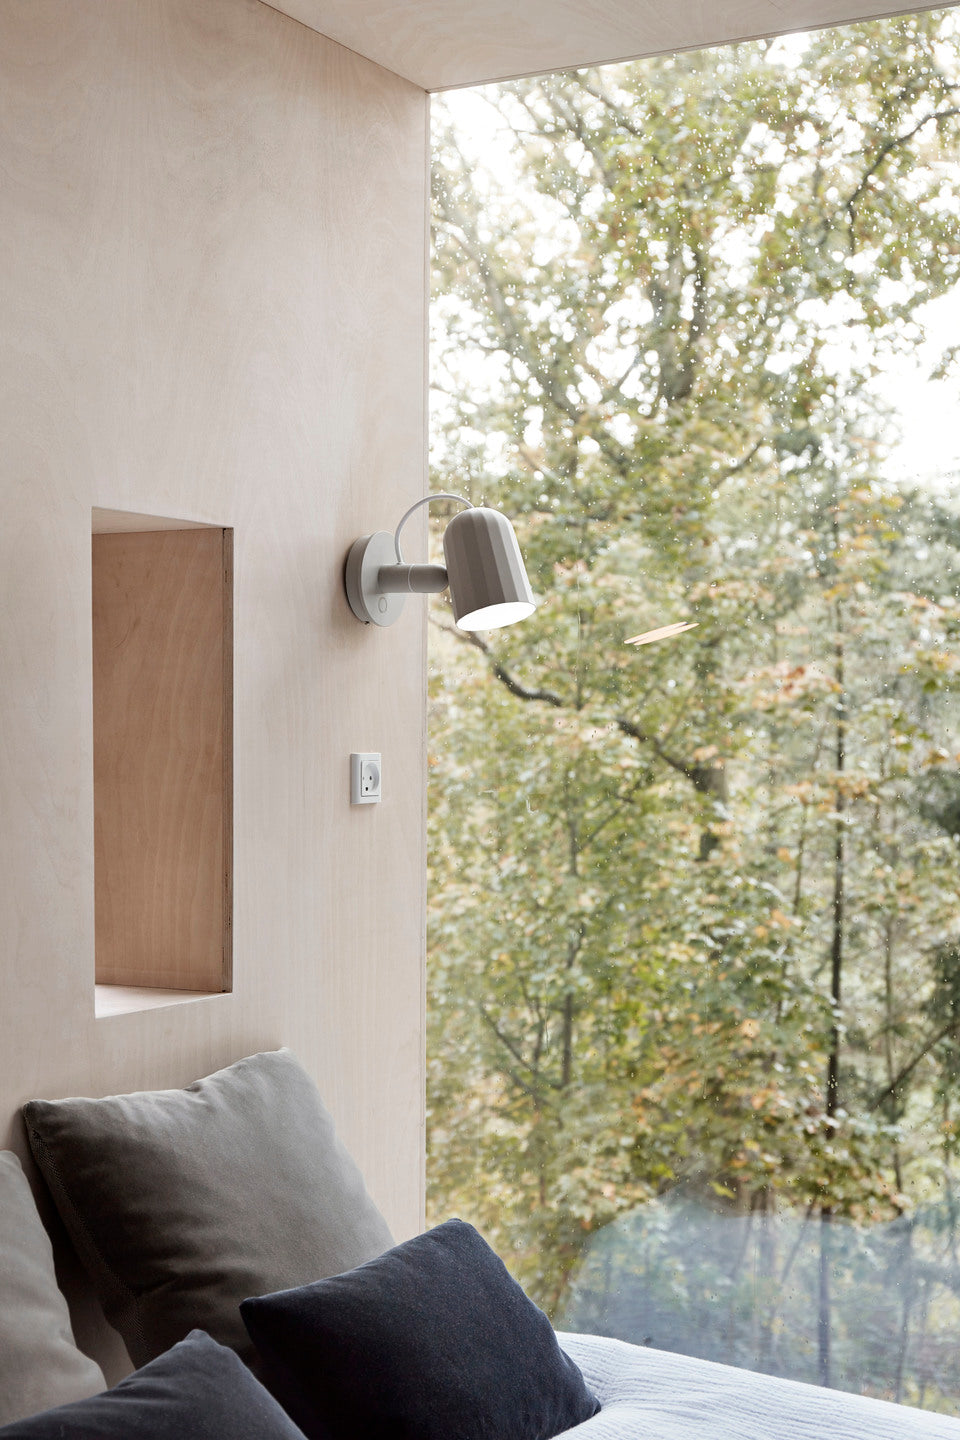 HAY Noc Wall Button Light